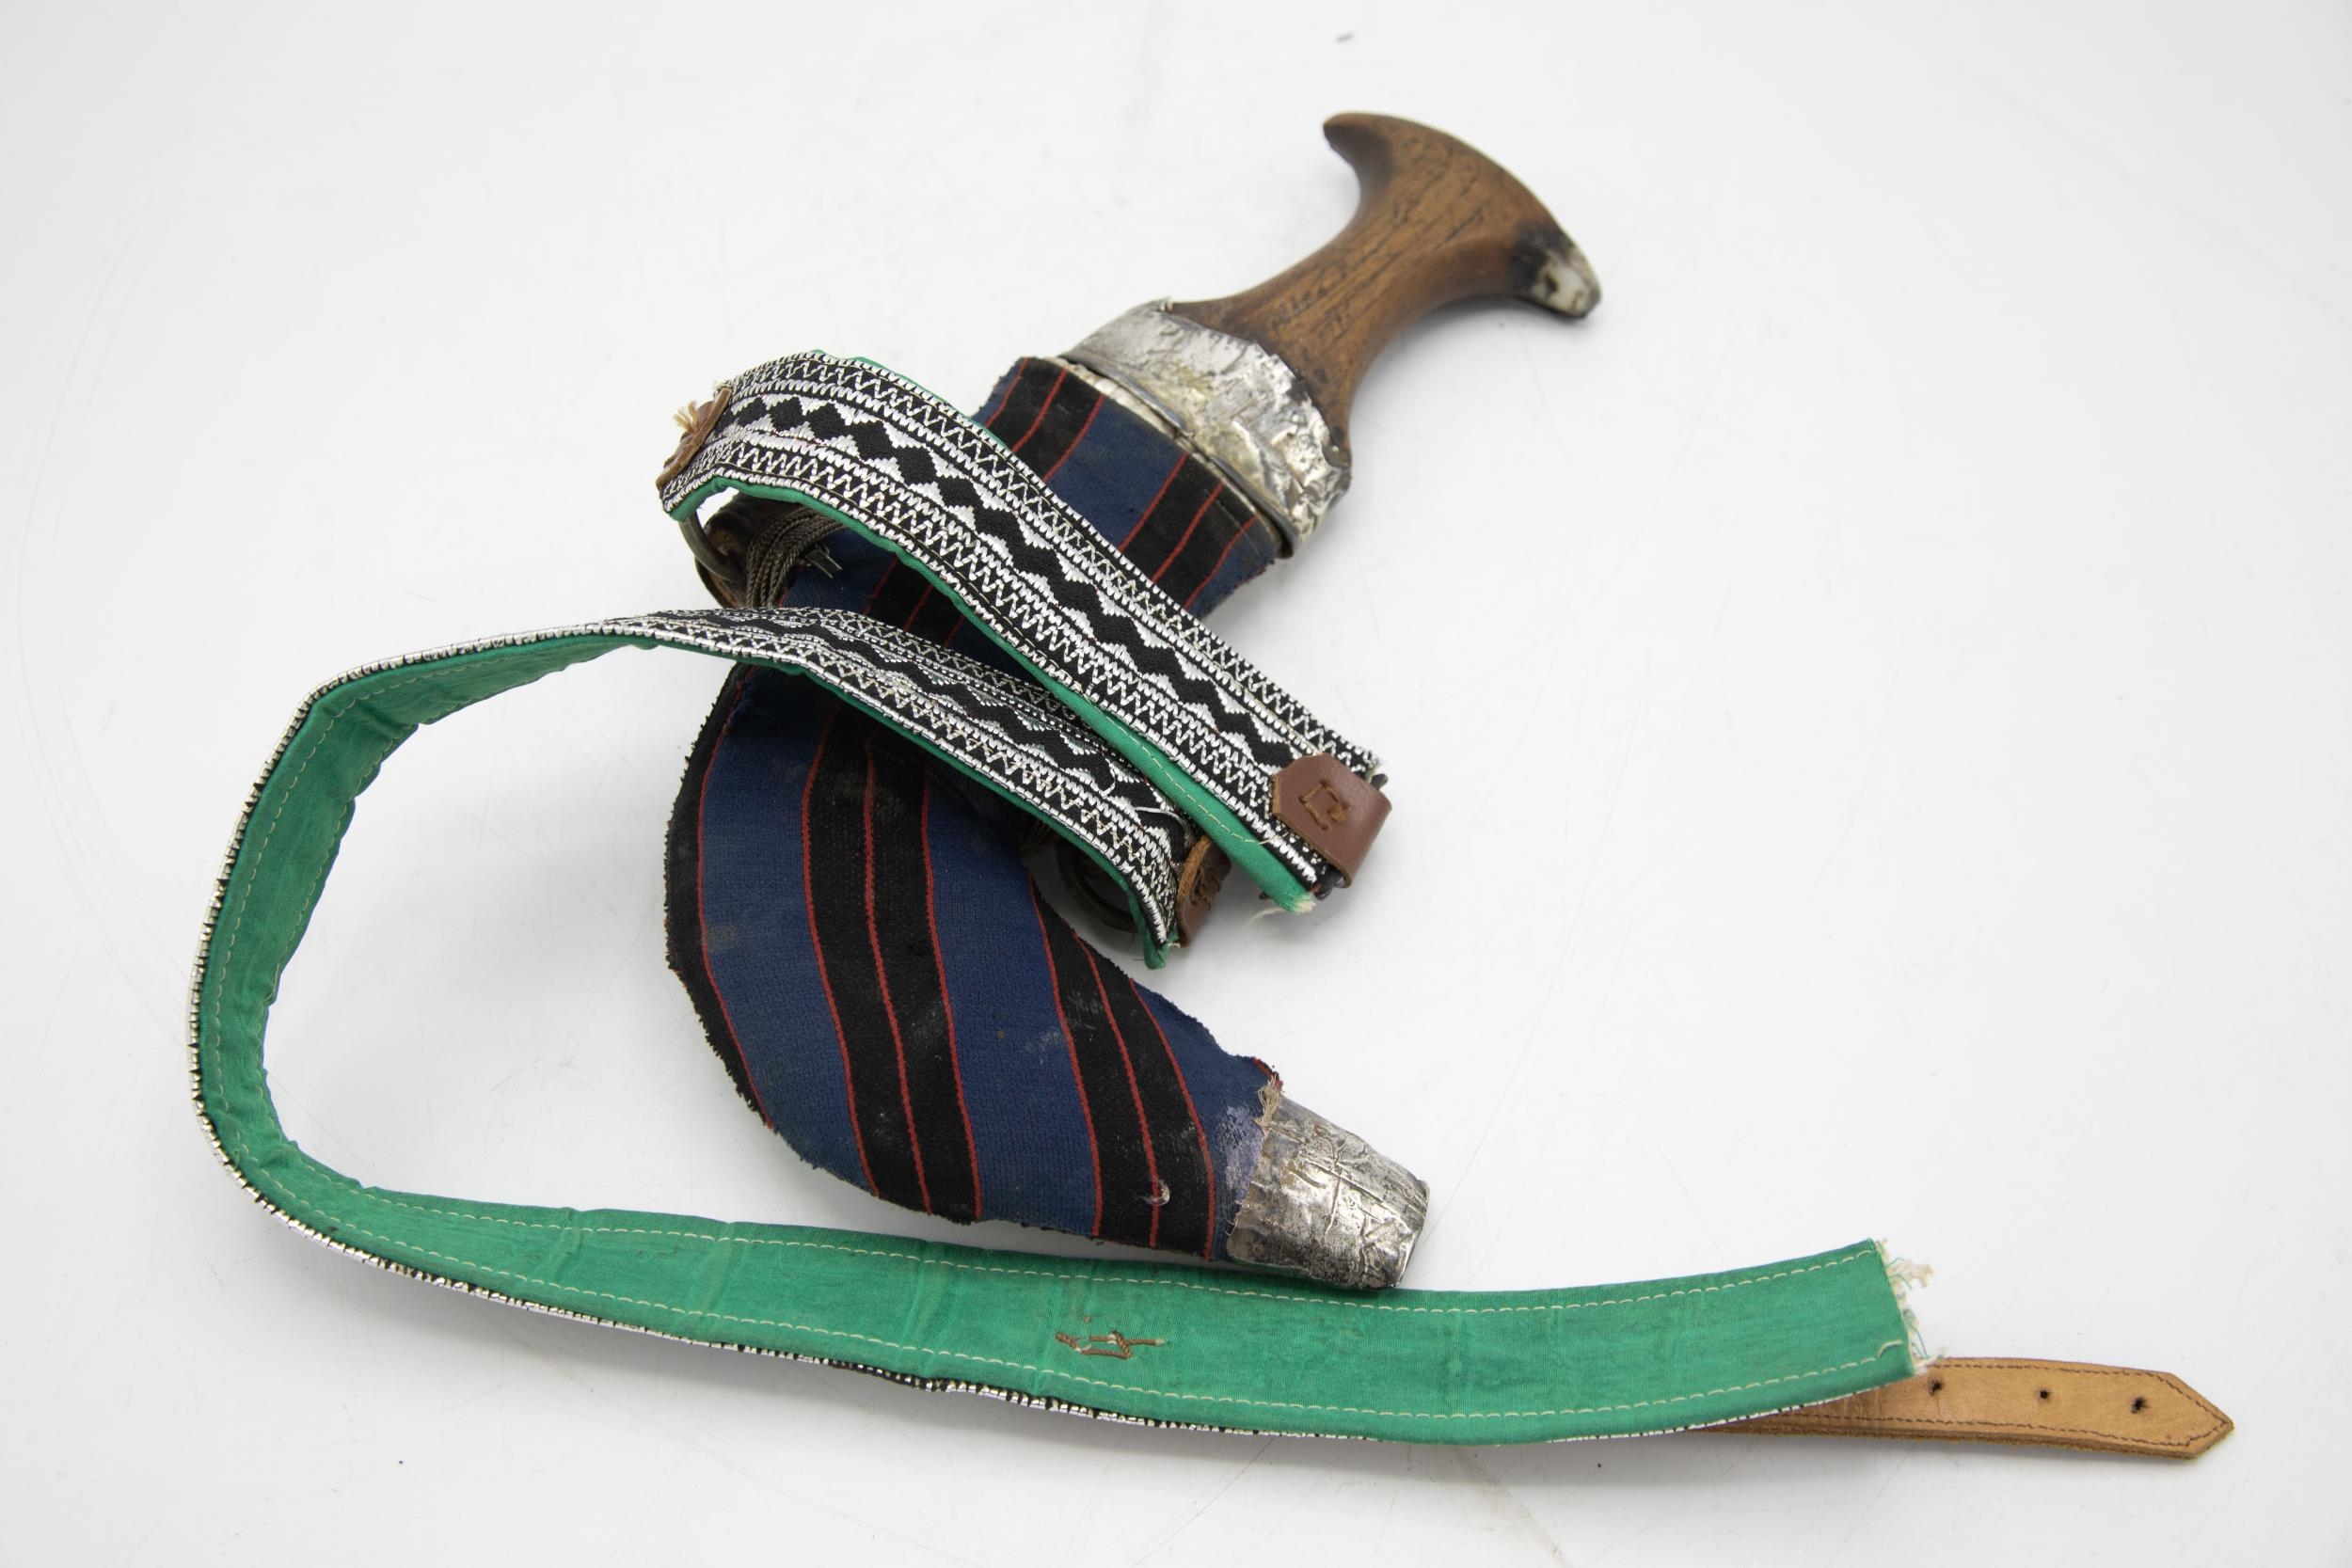 Turn of the century Persian Ottoman Jambiya dagger and belt in a goof silver sheath and silver - Image 3 of 3